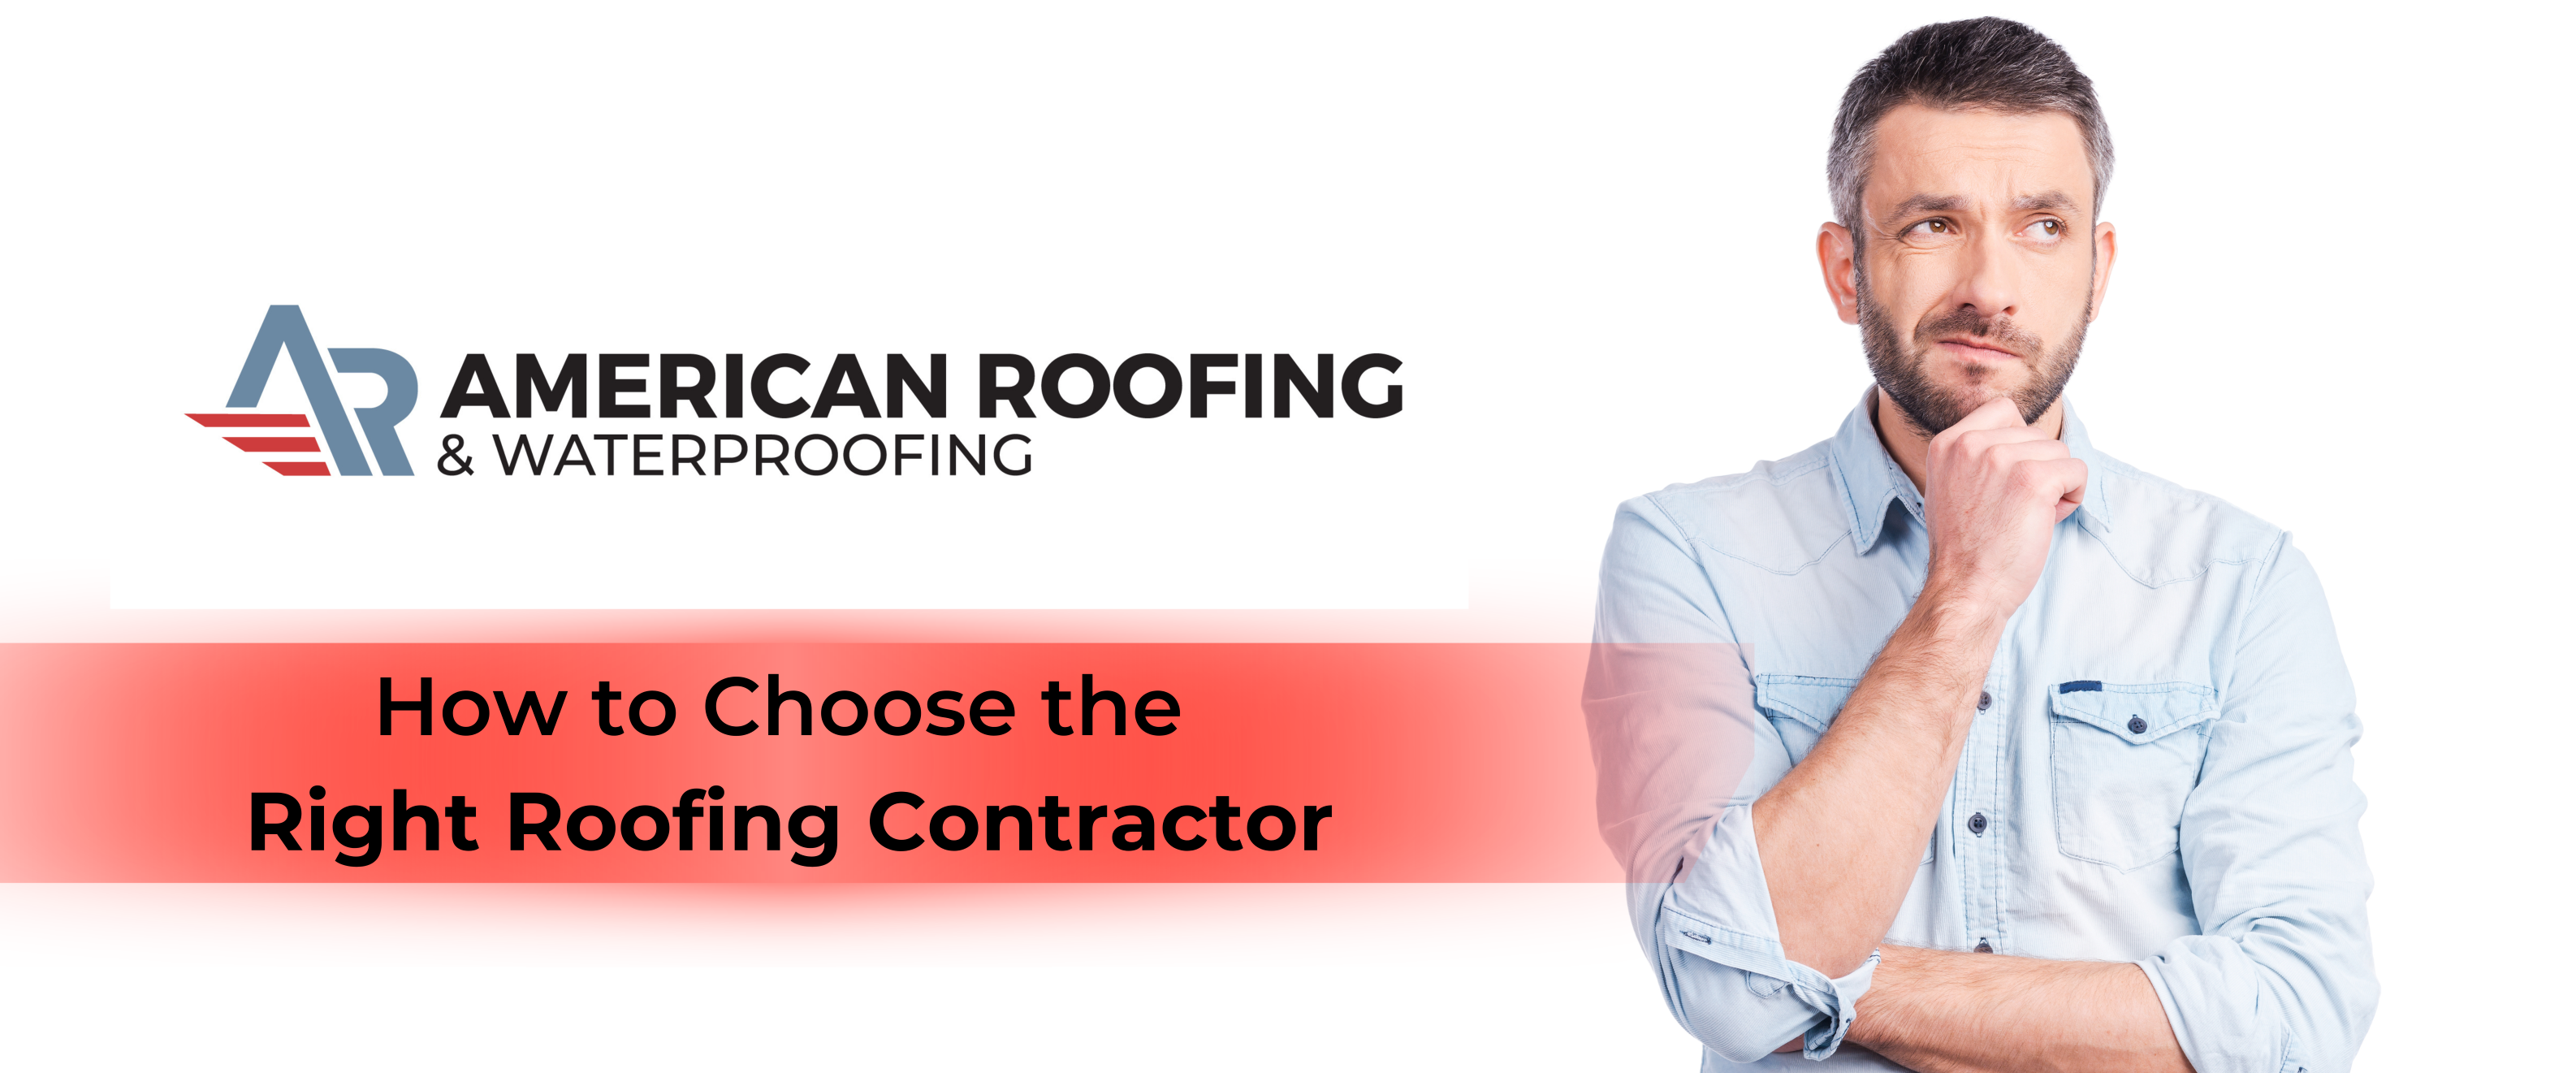 Roofing Contractors: 4 ways to verify that you're working with the pros.